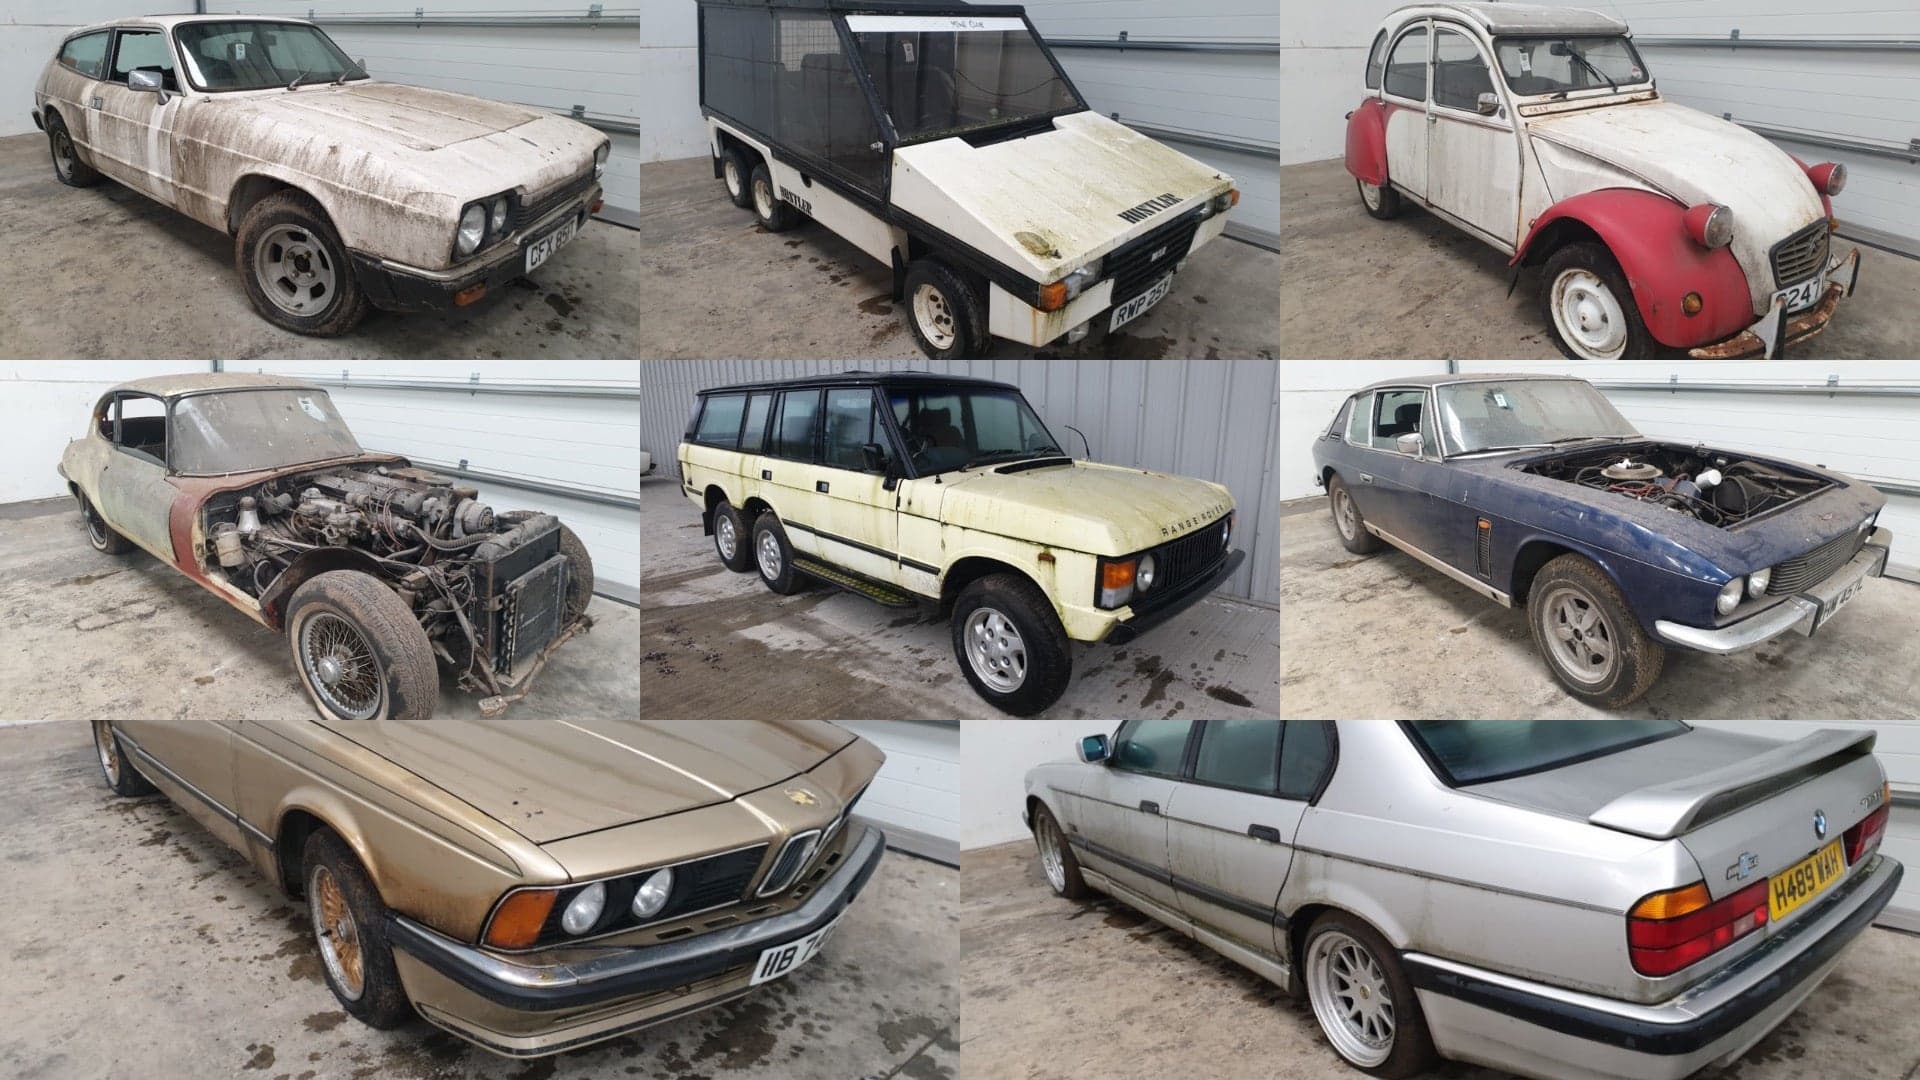 Government Auction of 135 Obscure Cars Seized in U.K. Is a Utopia of Rare Rides